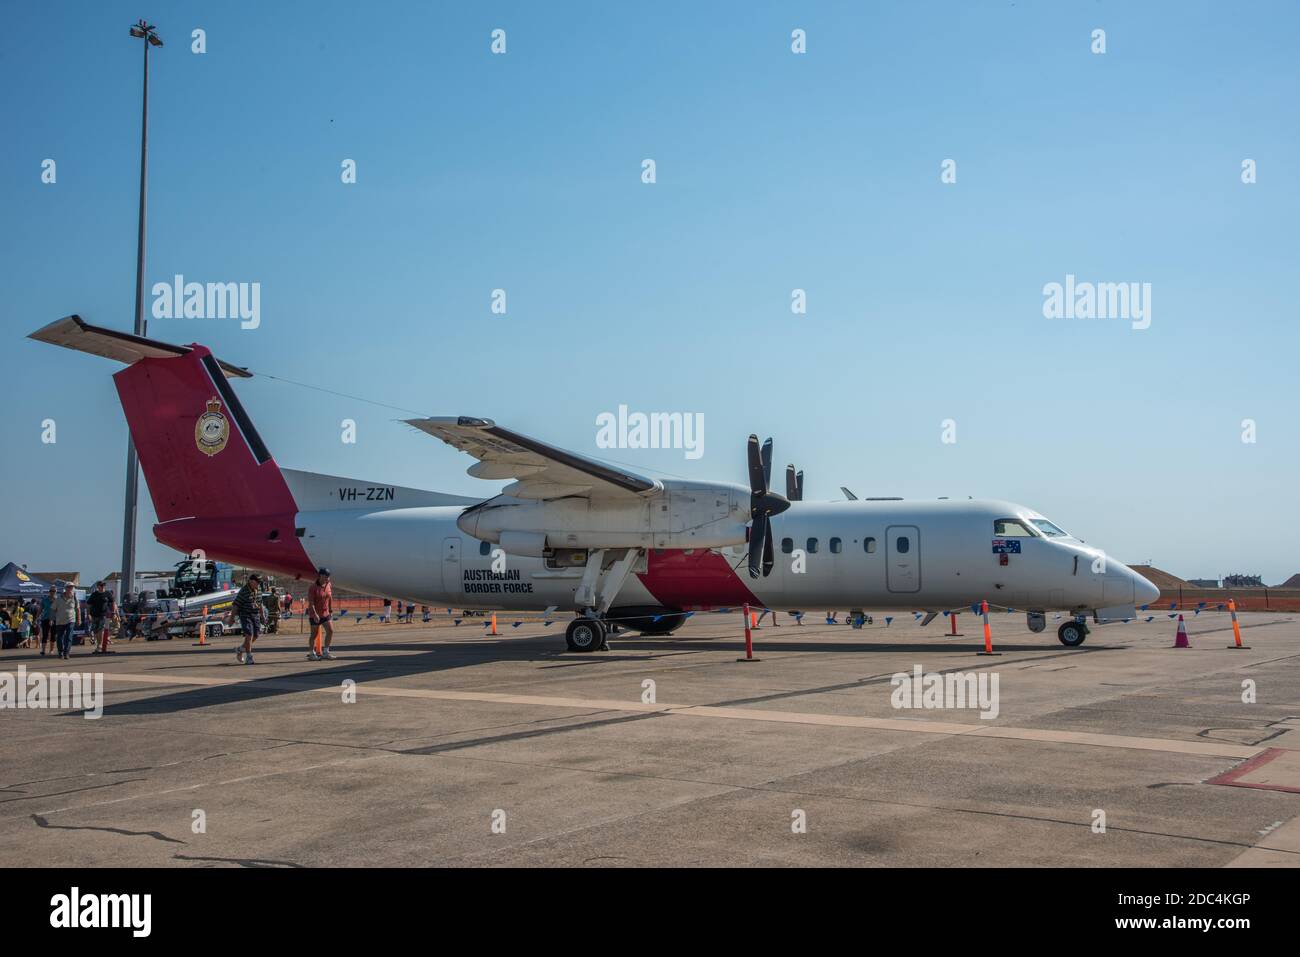 Darwin,NT,Australia-August 4,2018: Australian Border Force plane and people at the Pitch Black event demonstration in Darwin. Stock Photo